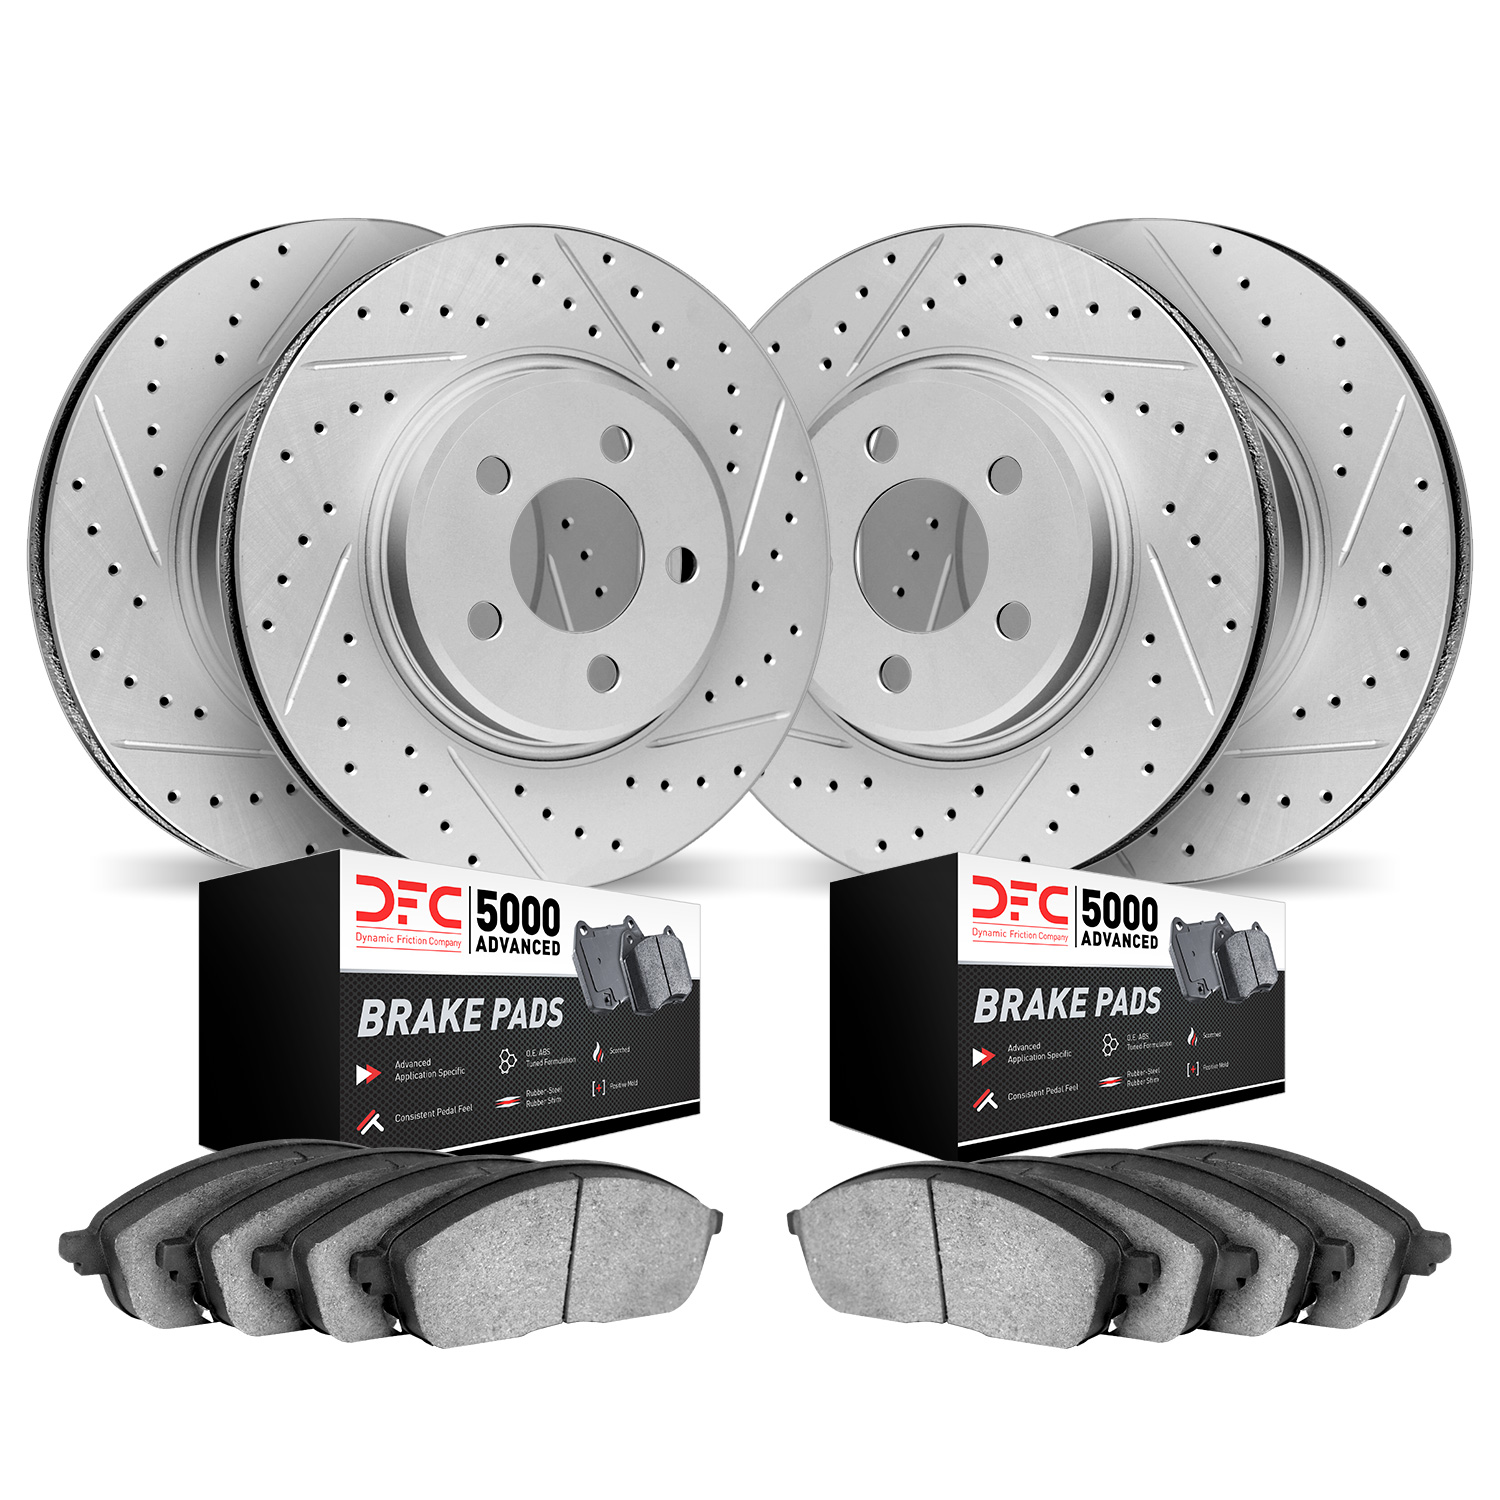 2504-31020 Geoperformance Drilled/Slotted Rotors w/5000 Advanced Brake Pads Kit, 2006-2006 BMW, Position: Front and Rear